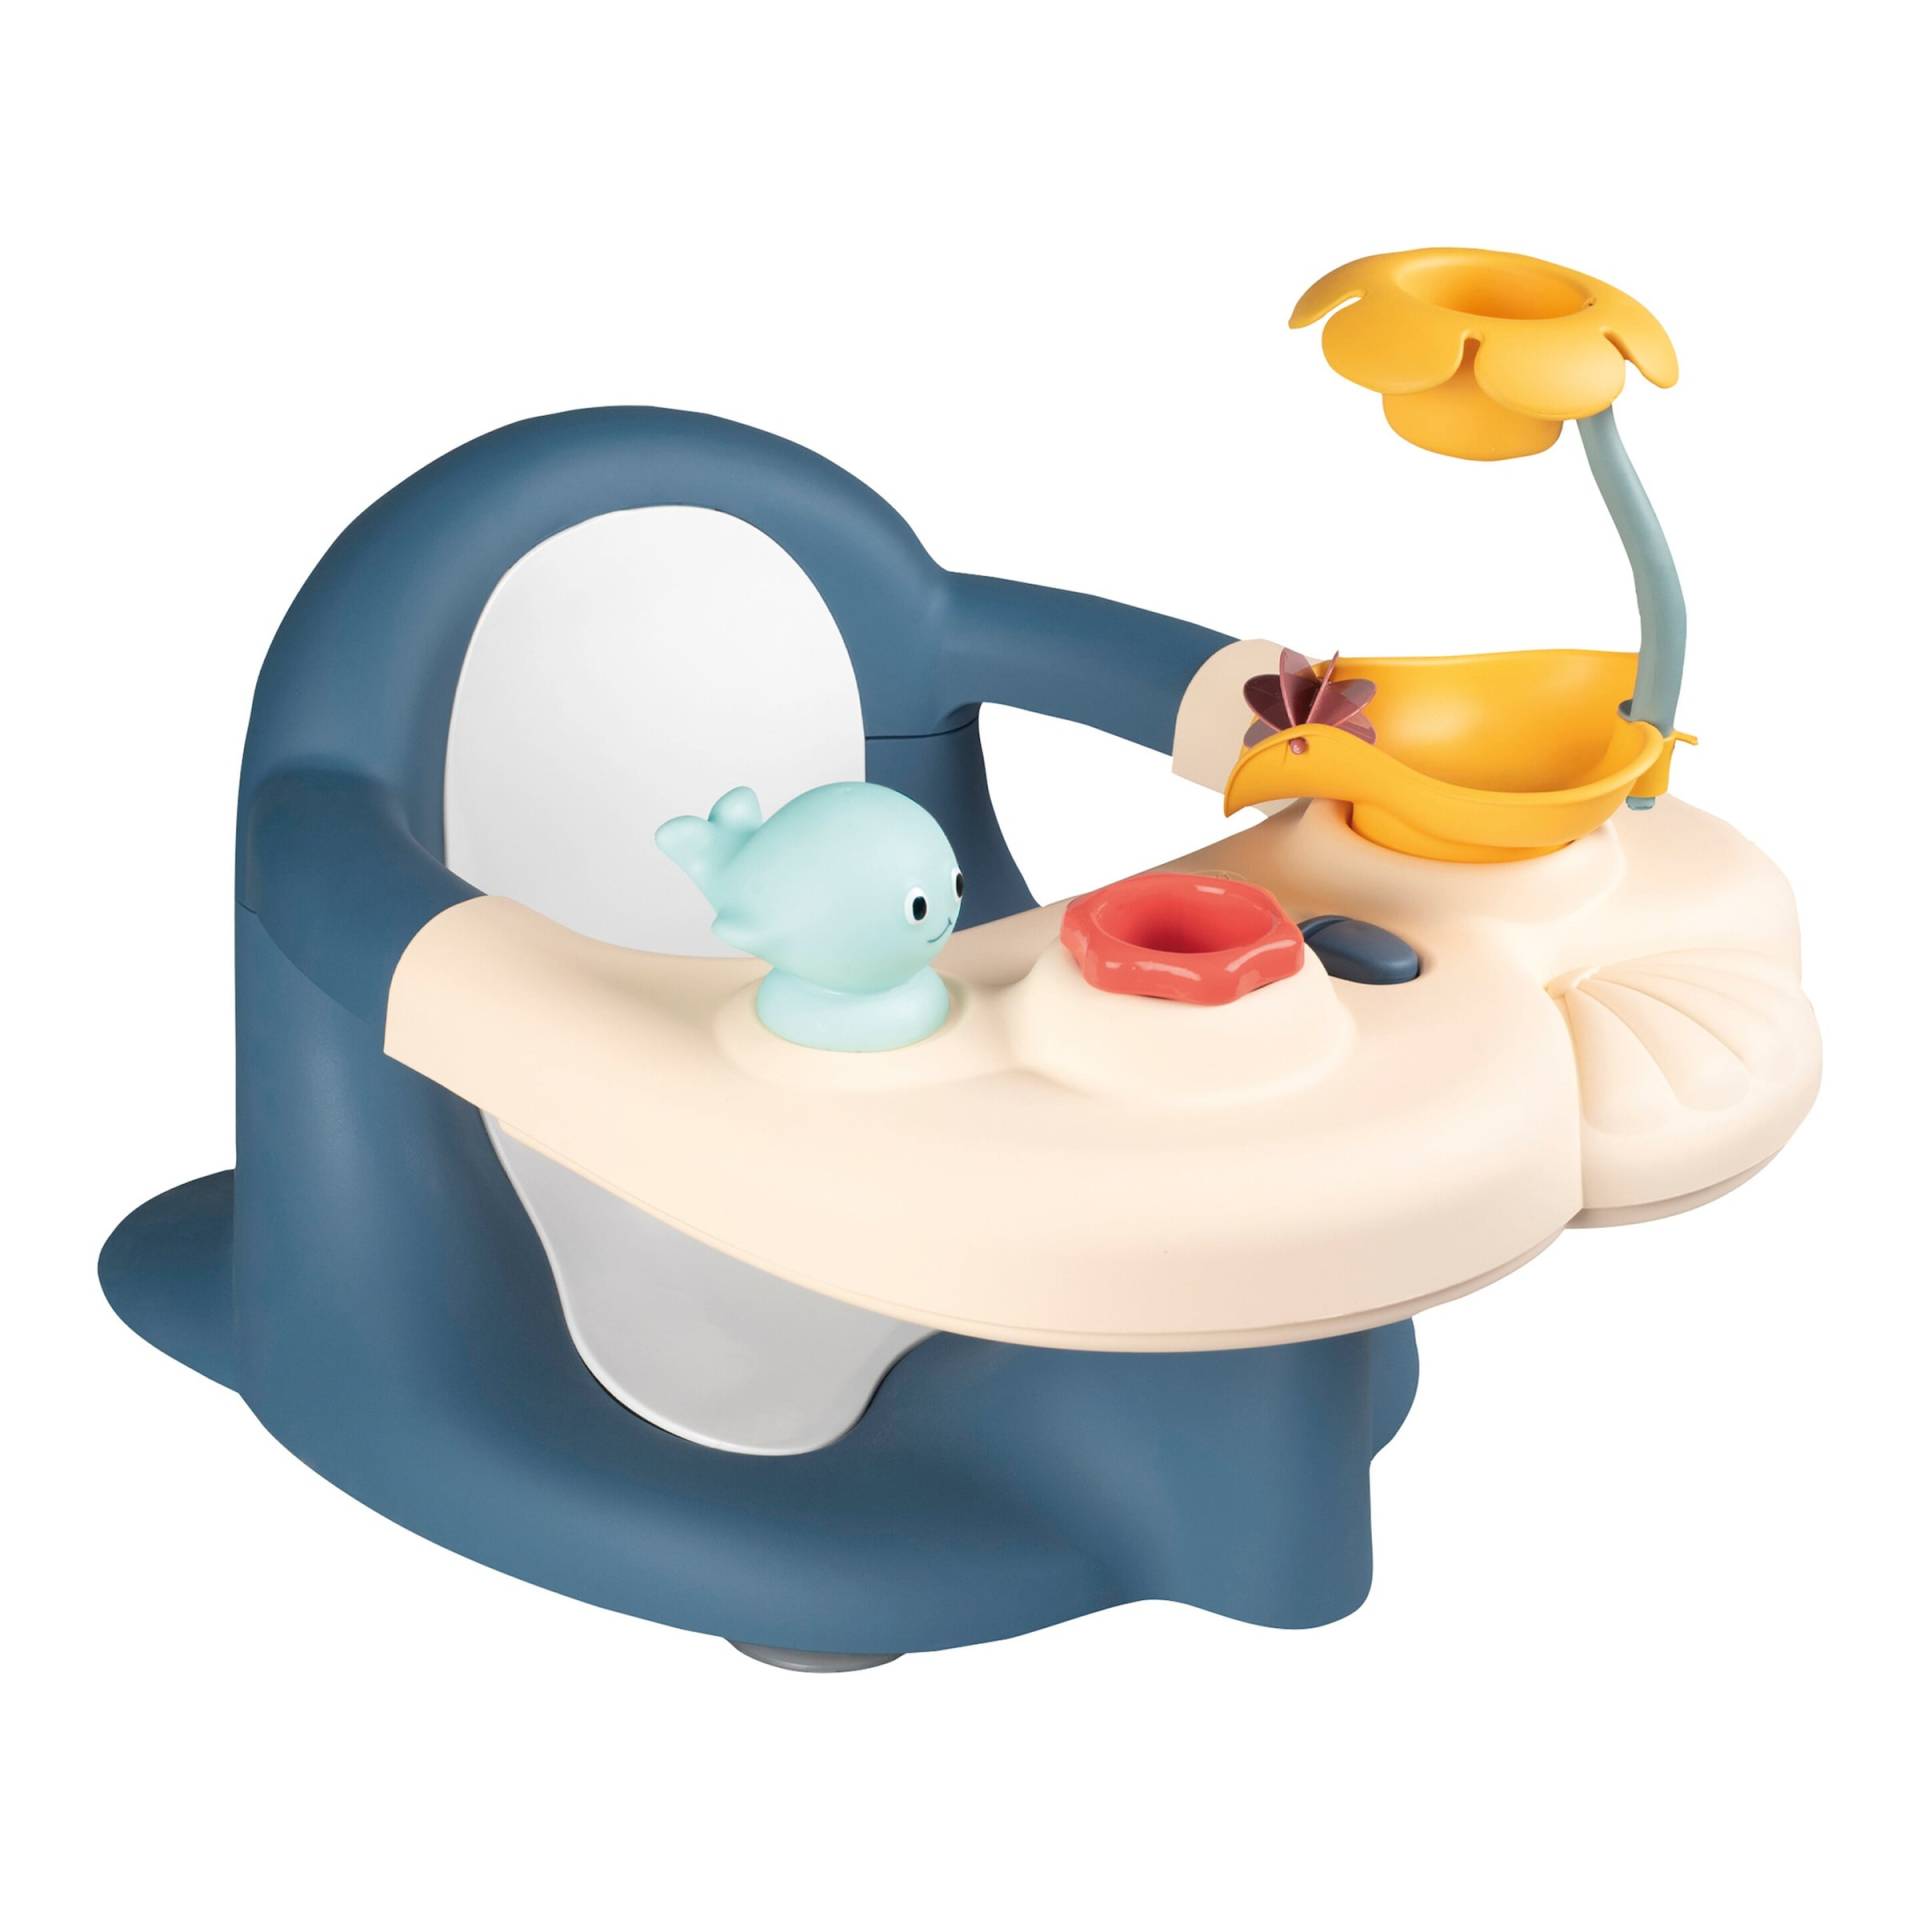 Smoby Baby-Badesitz Little Smoby von Smoby